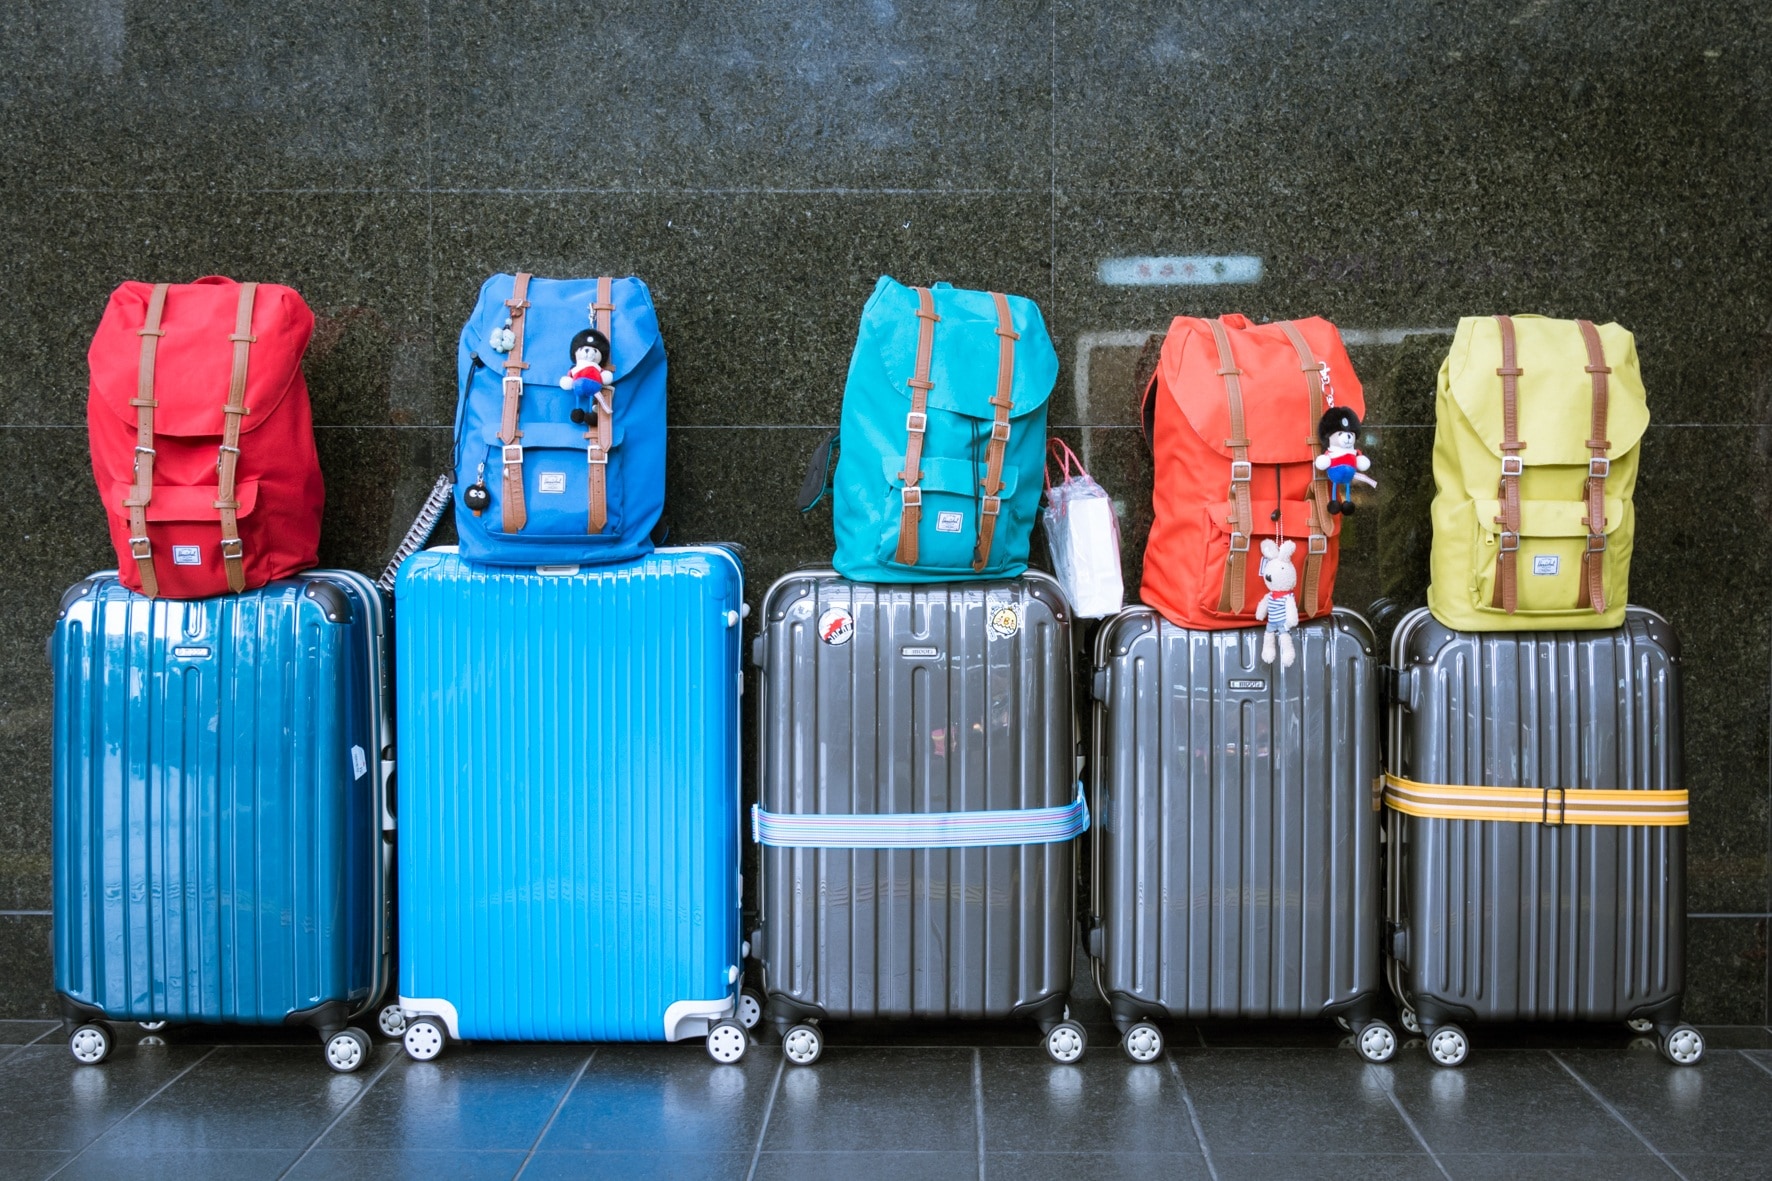 Luggage, Baggage, Suitcases, Bags, in a row, variation